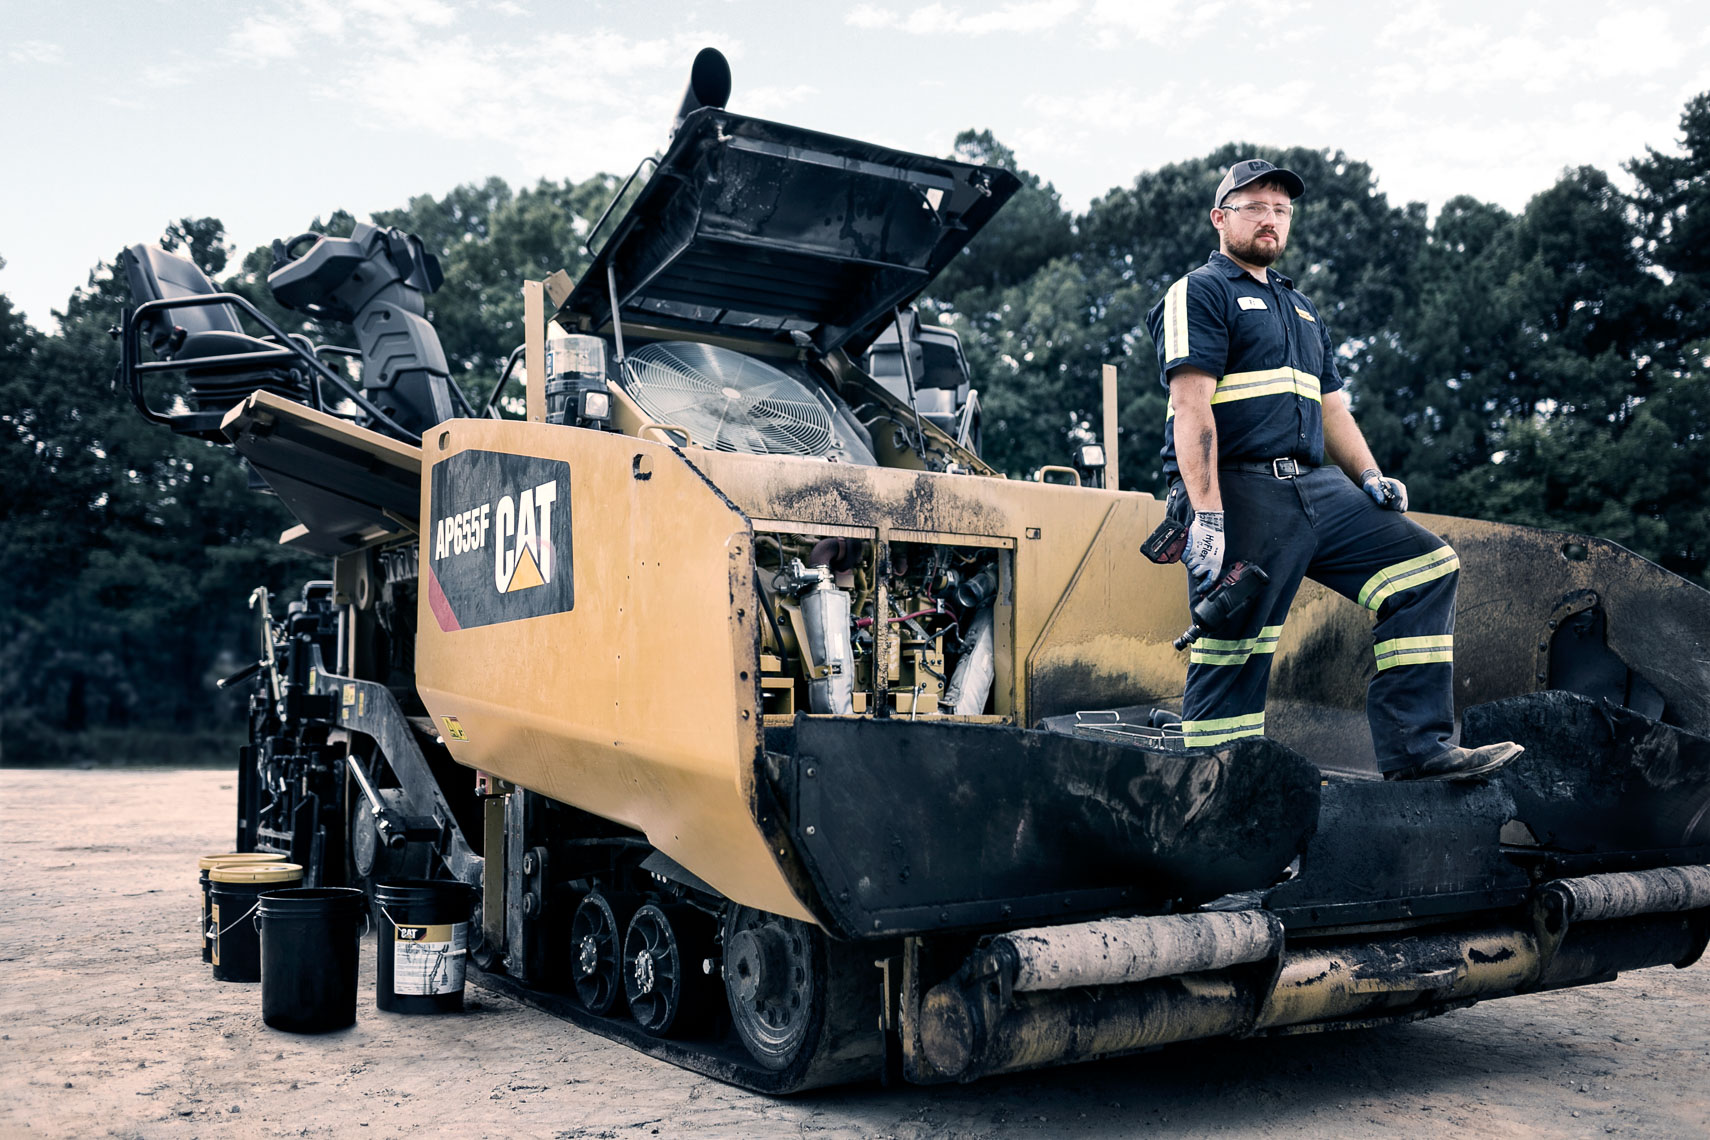 Service_Technicians_for_Gregory_Poole_20190904_photo_by_Justin_Kase_Conder_1052_Retouched_V01_CAT.JPG